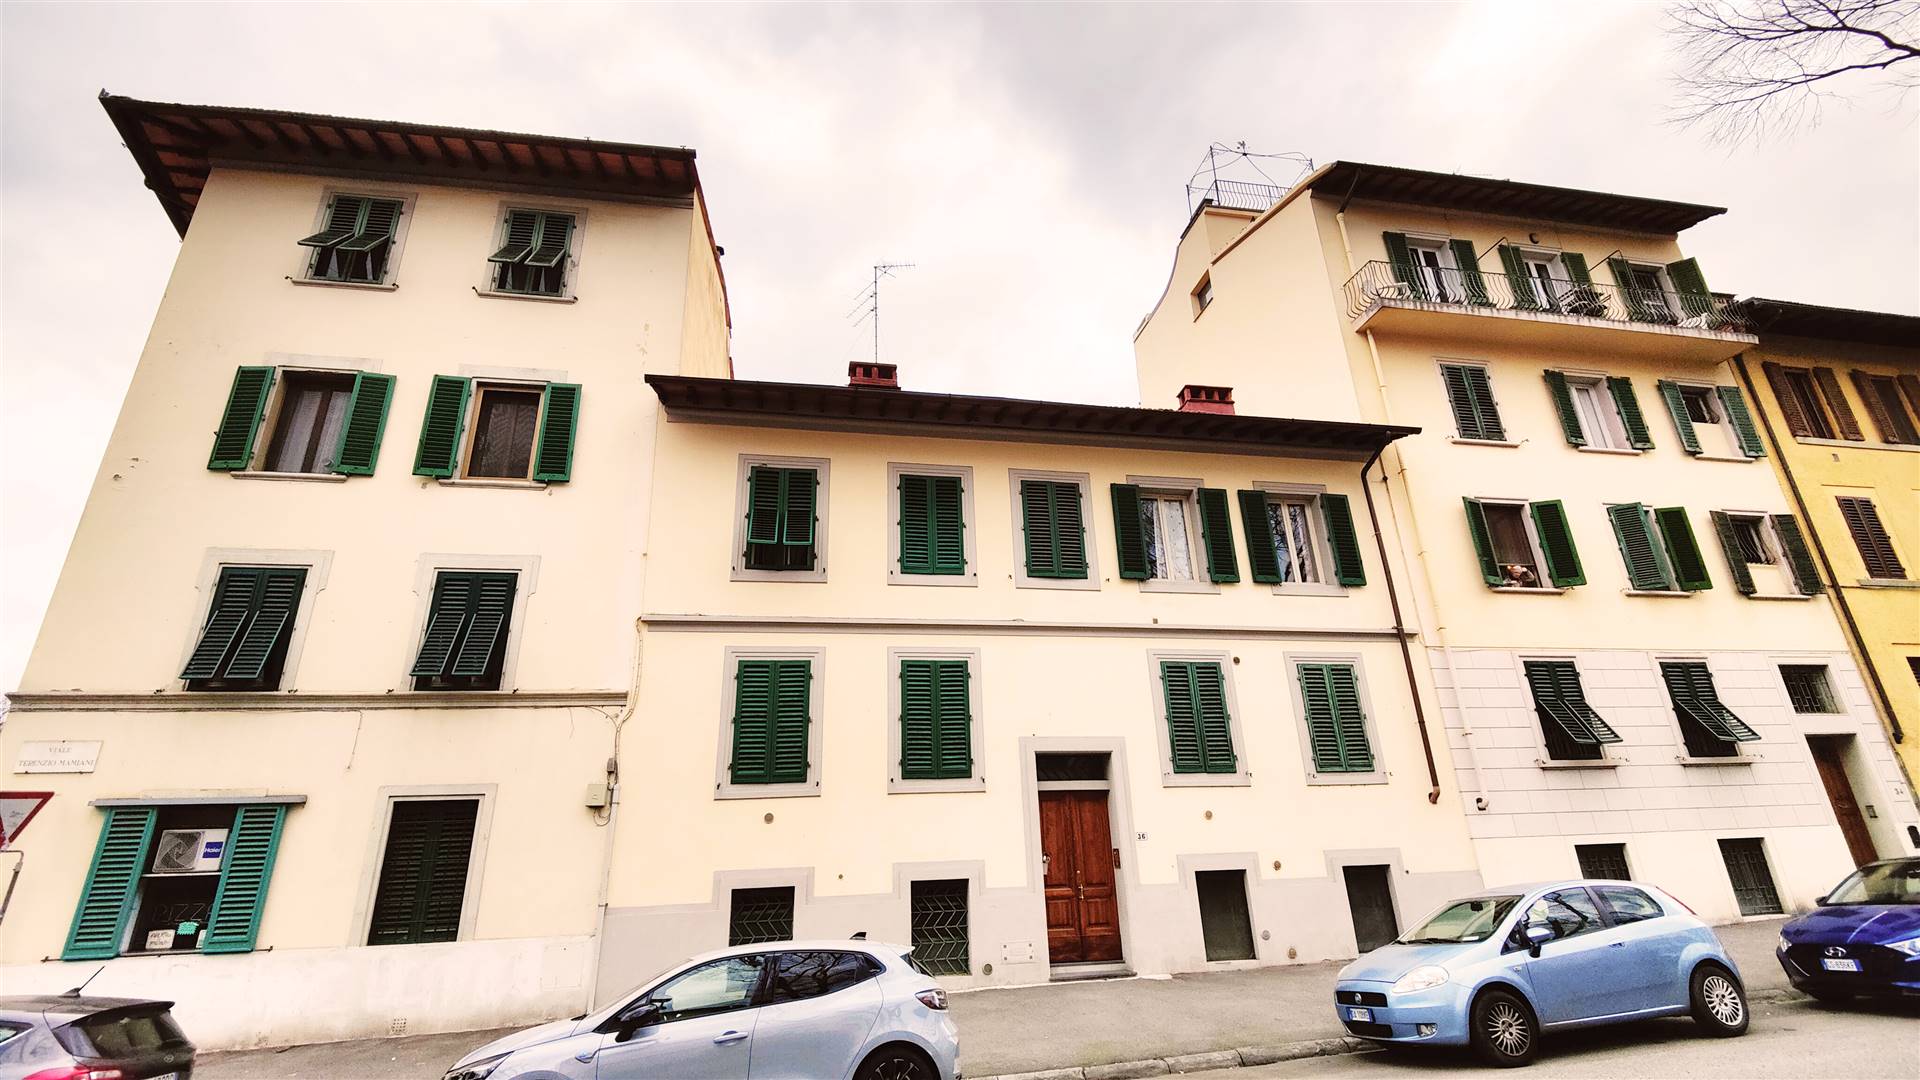 SCEGLI LA ZONA, FIRENZE, Apartment for sale of 78 Sq. mt., Restored, Heating Individual heating system, Energetic class: G, Epi: 100,86 kwh/m2 year, 